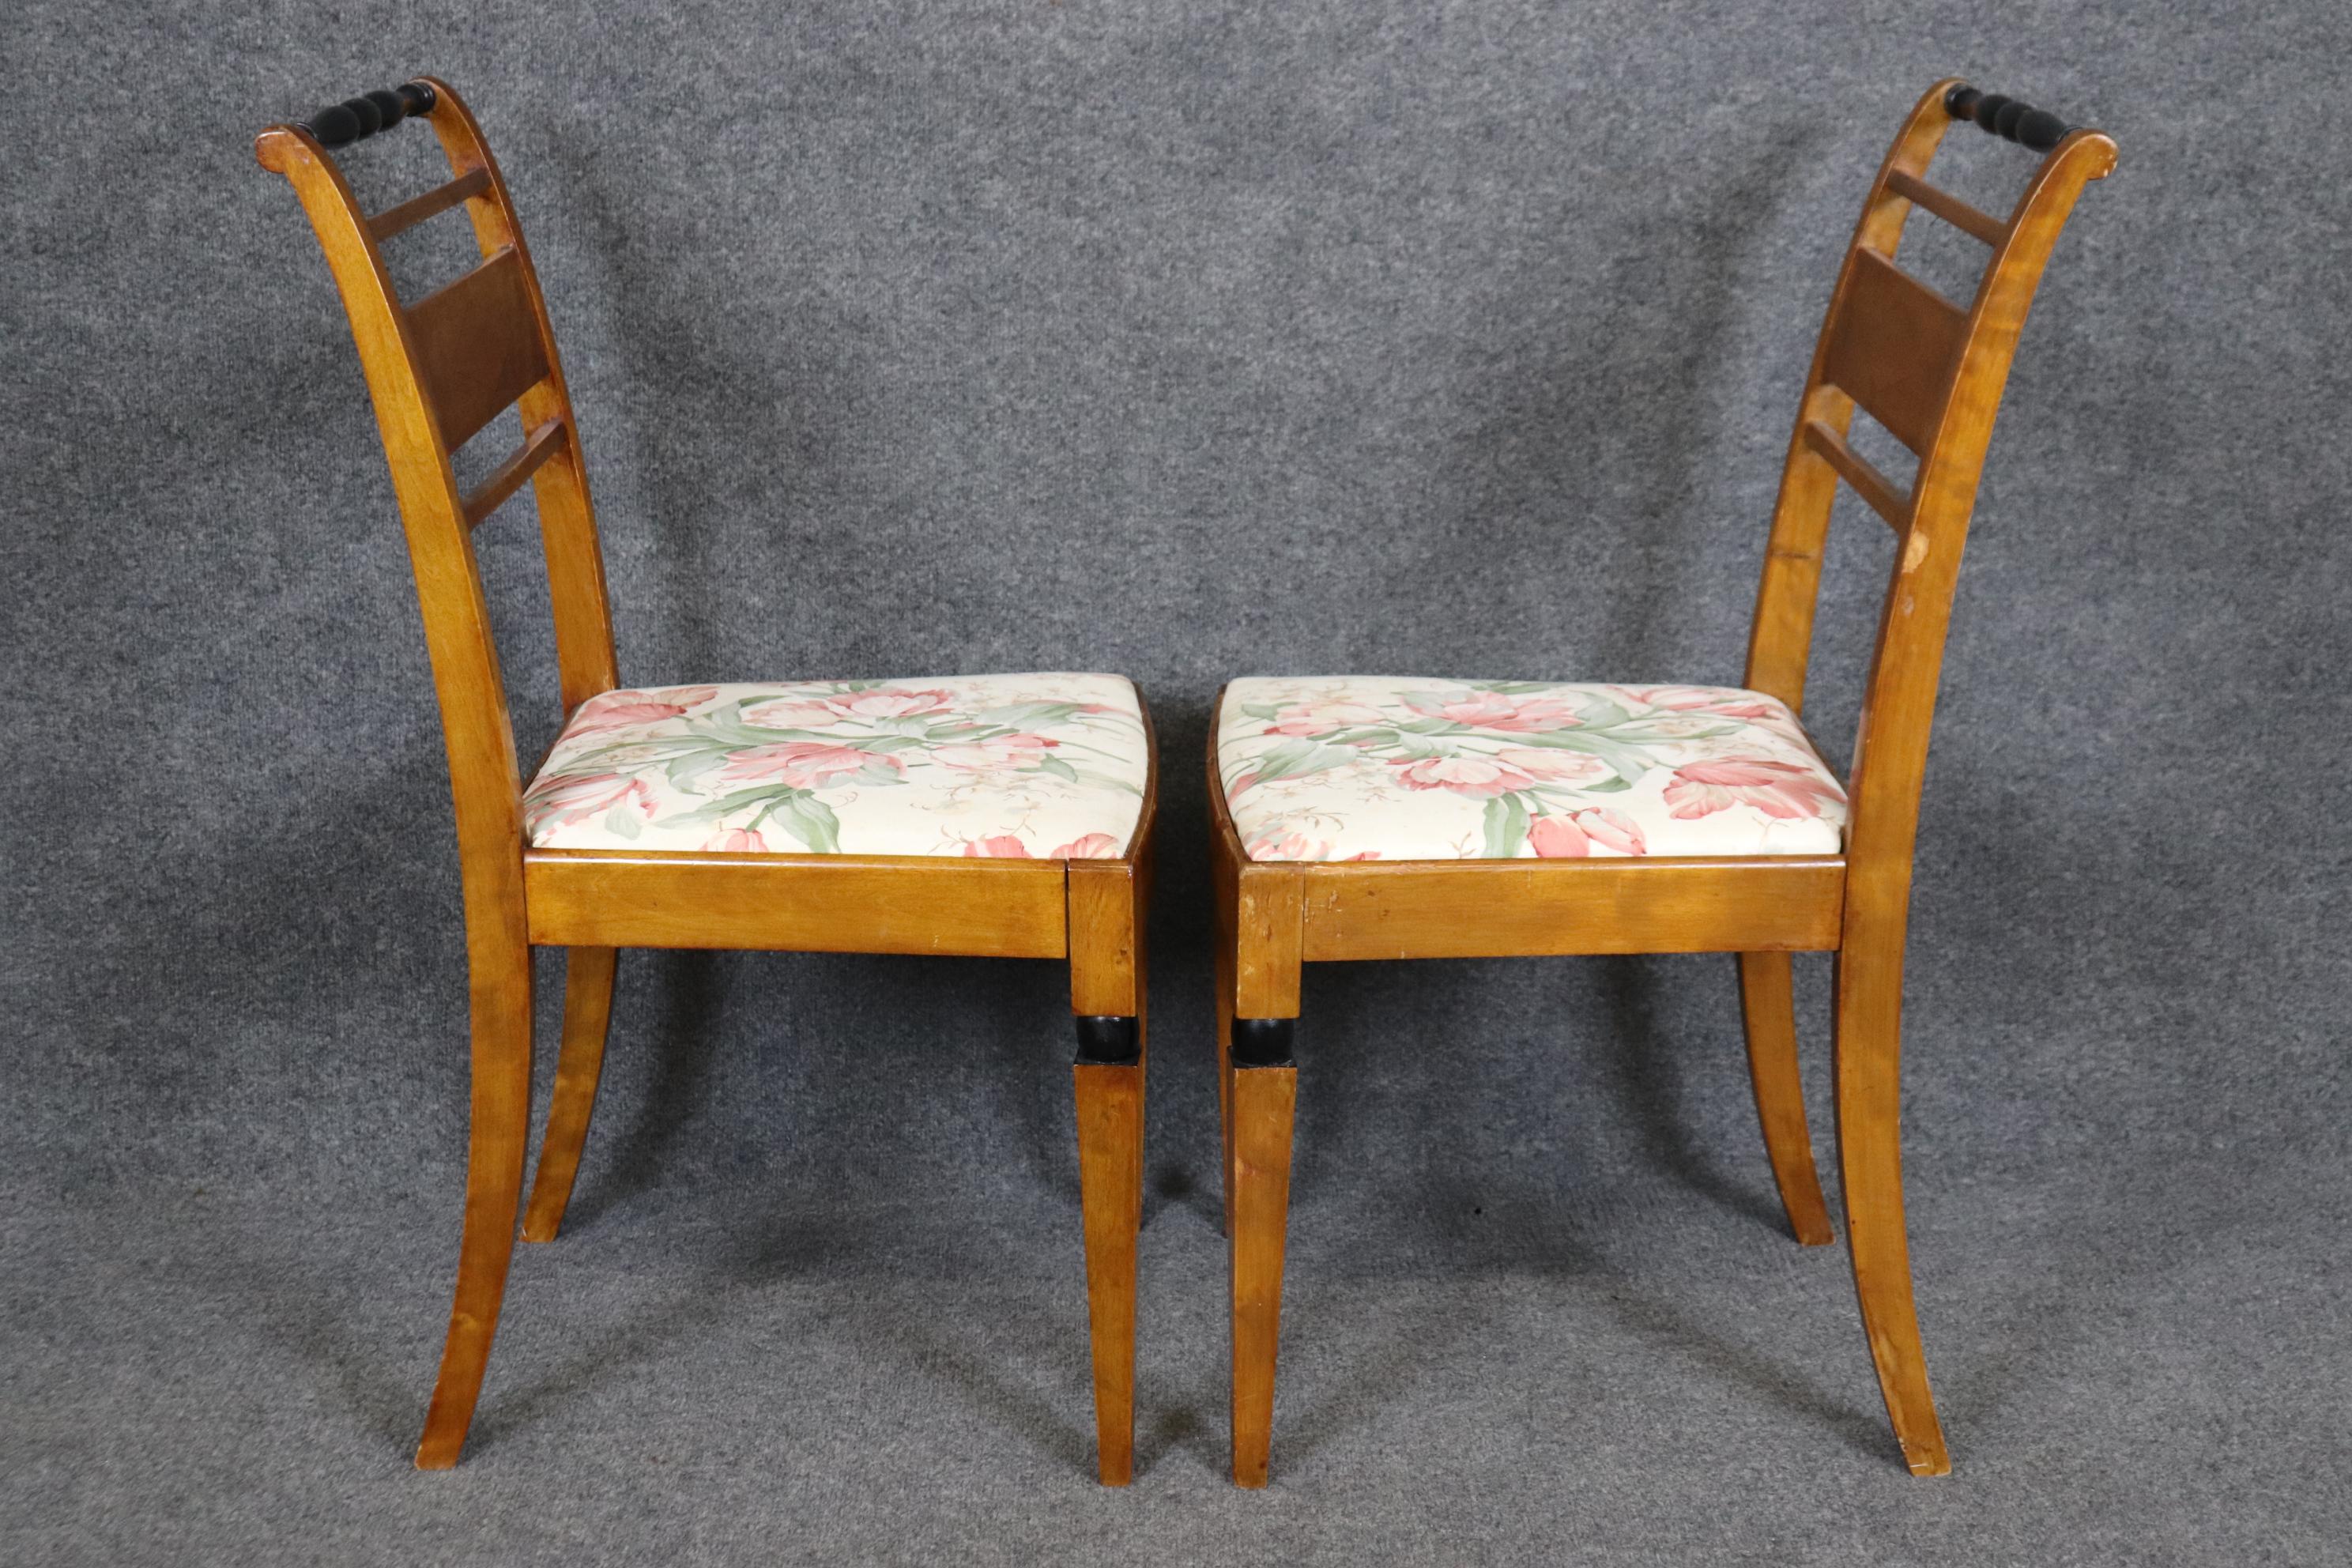 Pair of Birch Antique Biedermeier Style Side chairs with Ebonized Accents For Sale 2